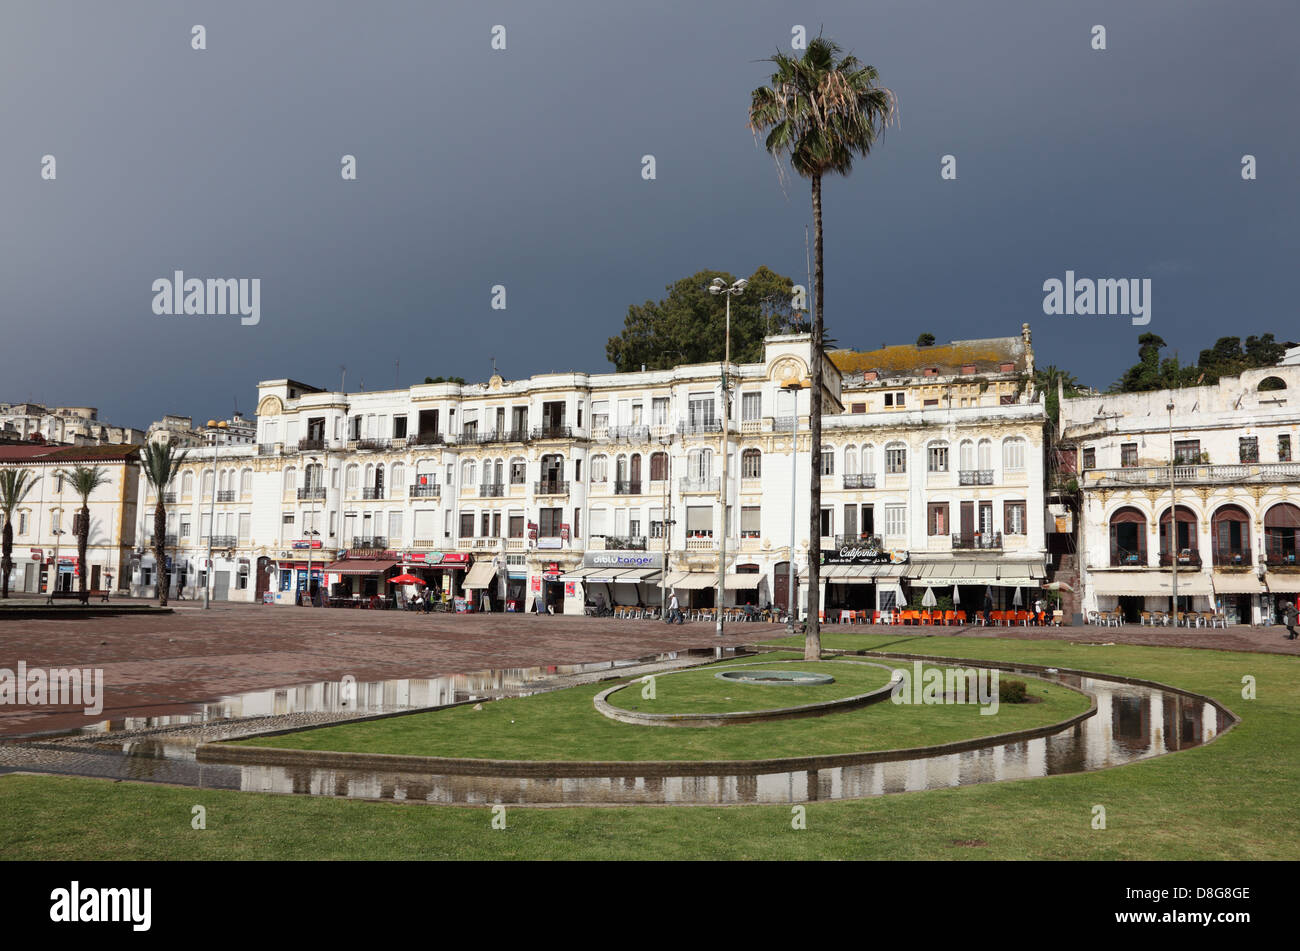 Square in the city of Tangier, Morocco Stock Photo